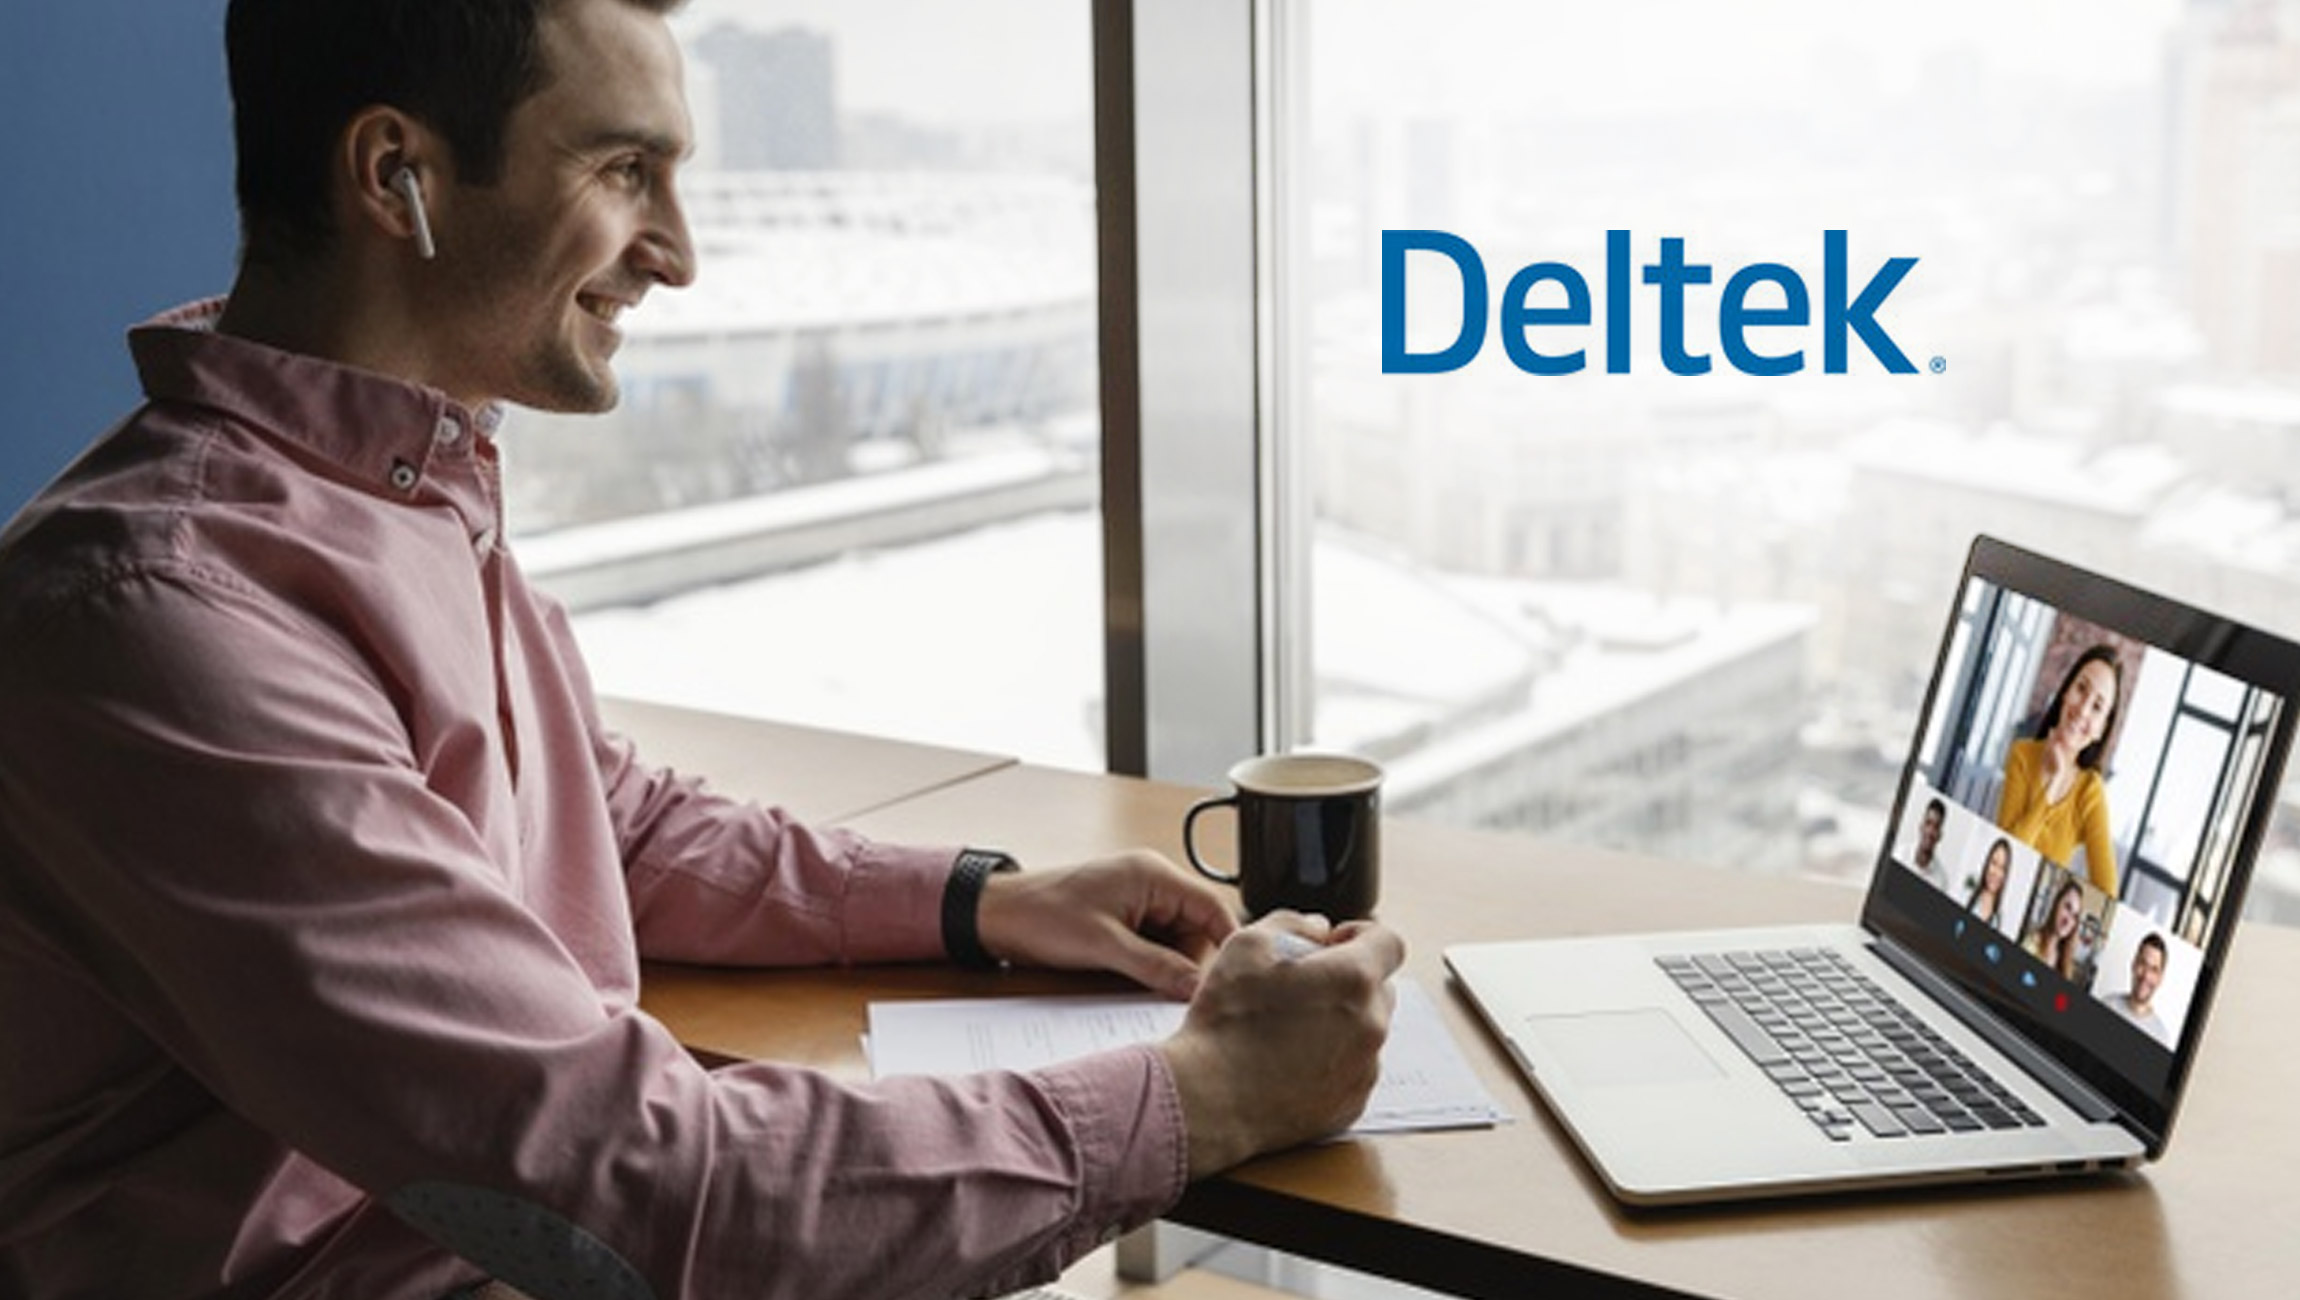 Deltek Announces Significant Growth and Momentum Among Small Businesses in the Architecture & Engineering Market with Its Deltek Ajera Solution